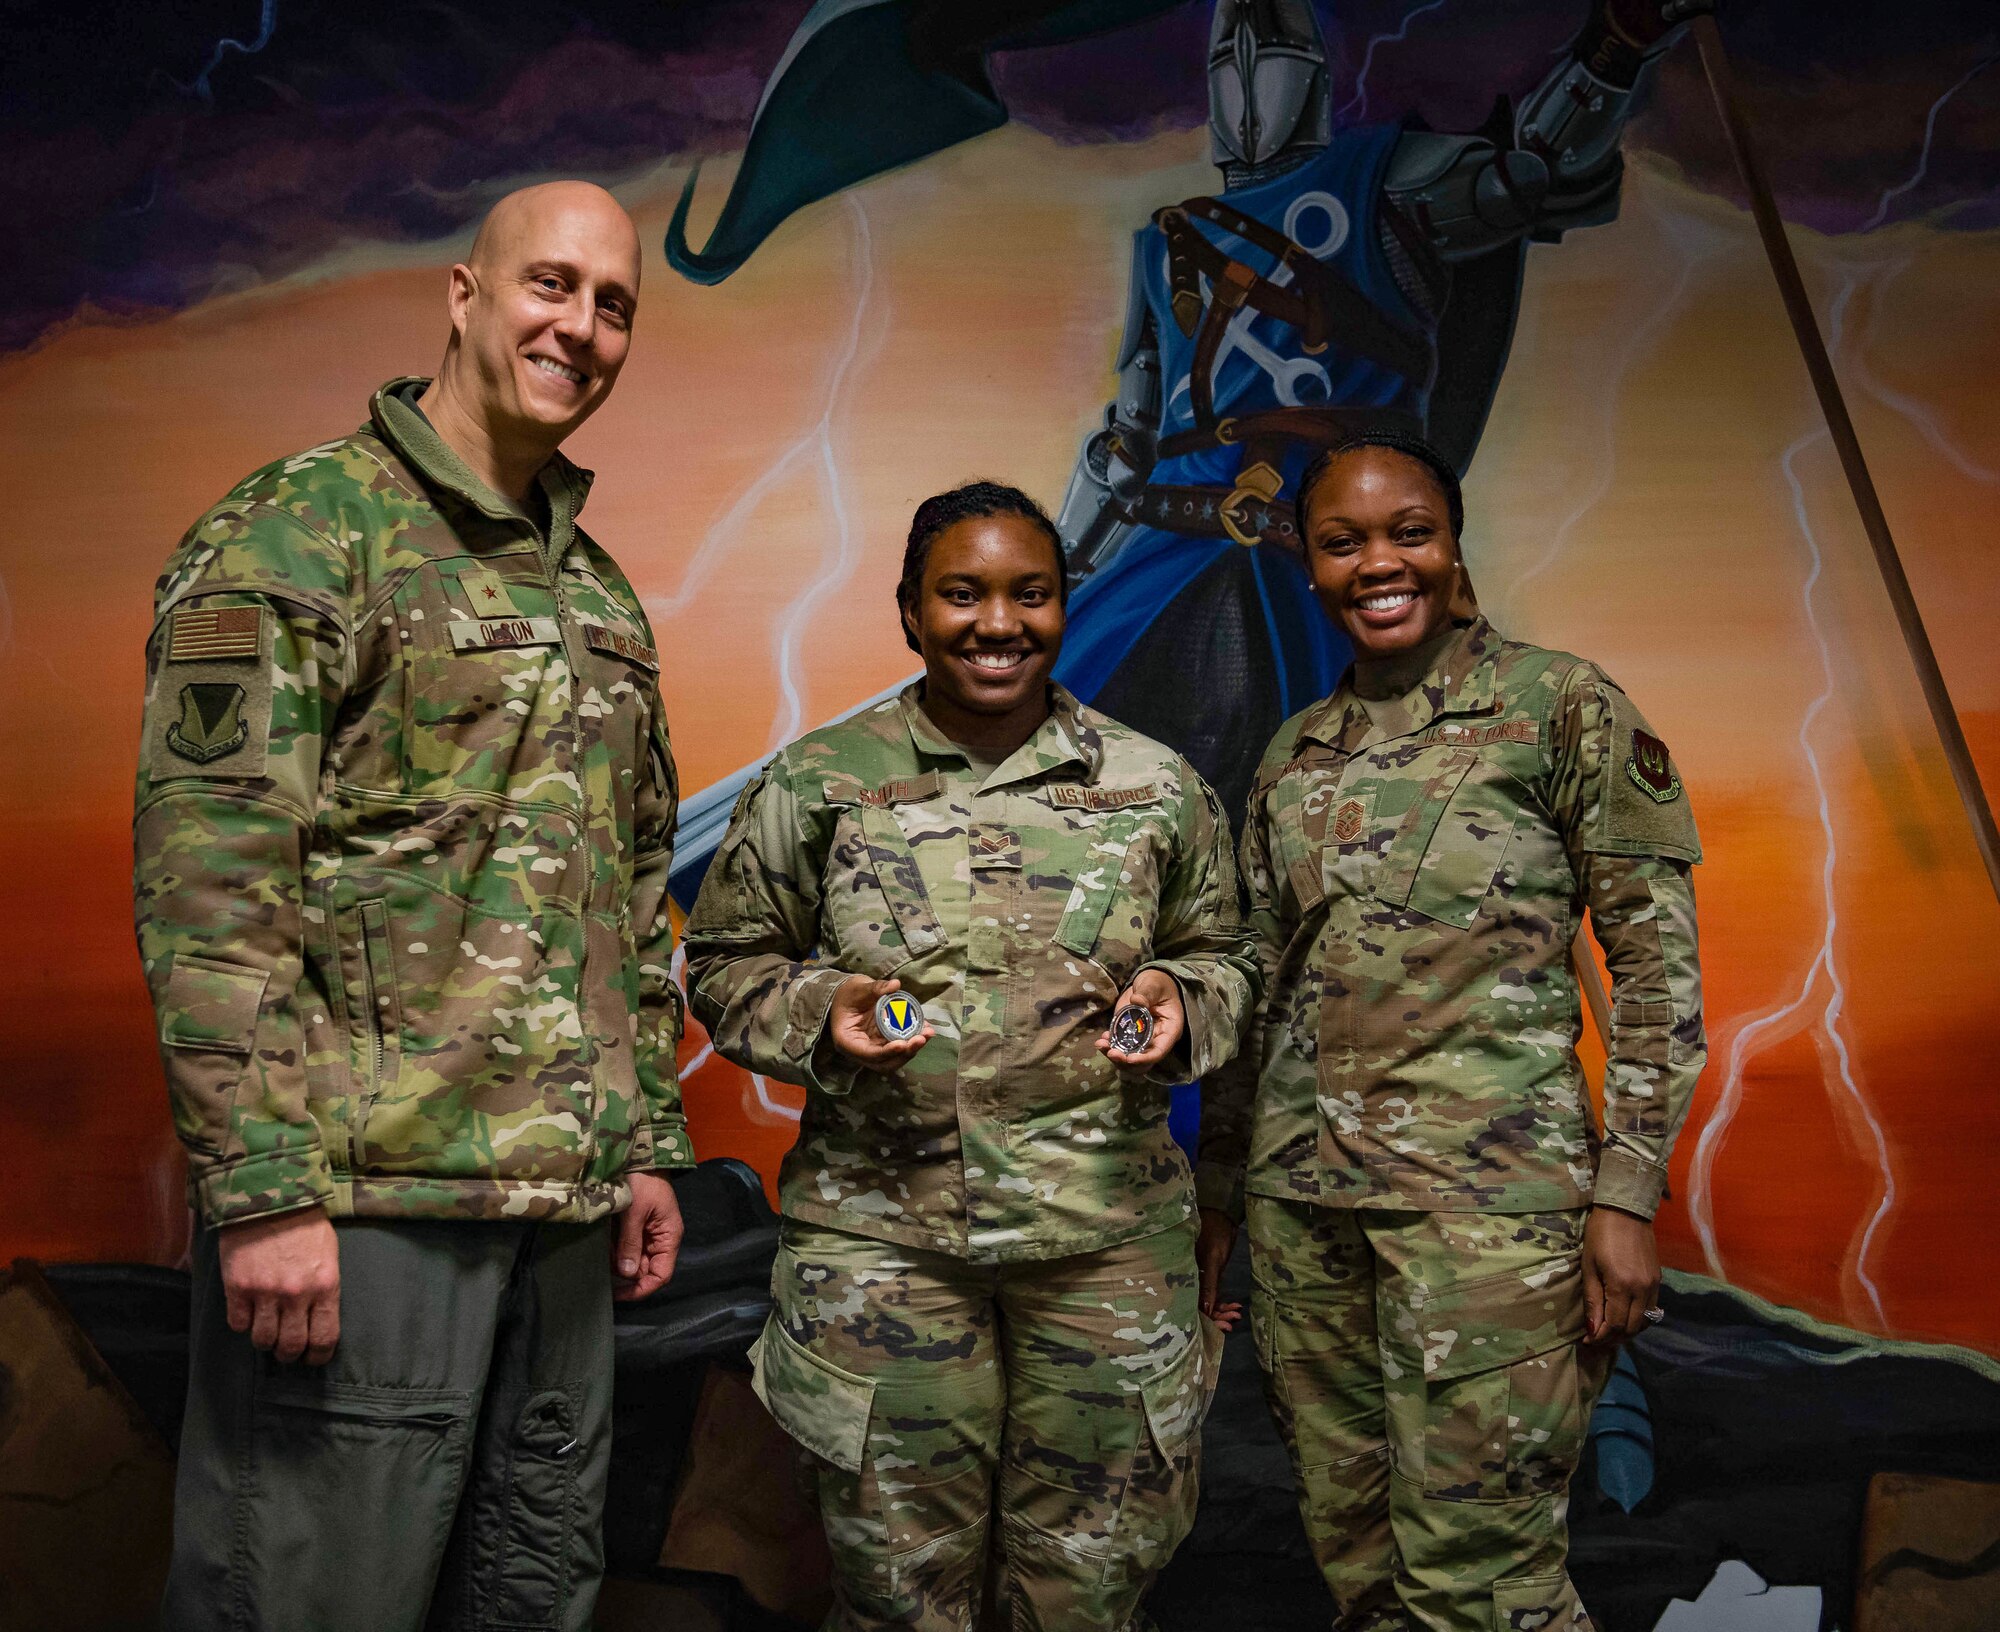 Airman poses with base leadership after receiving award.